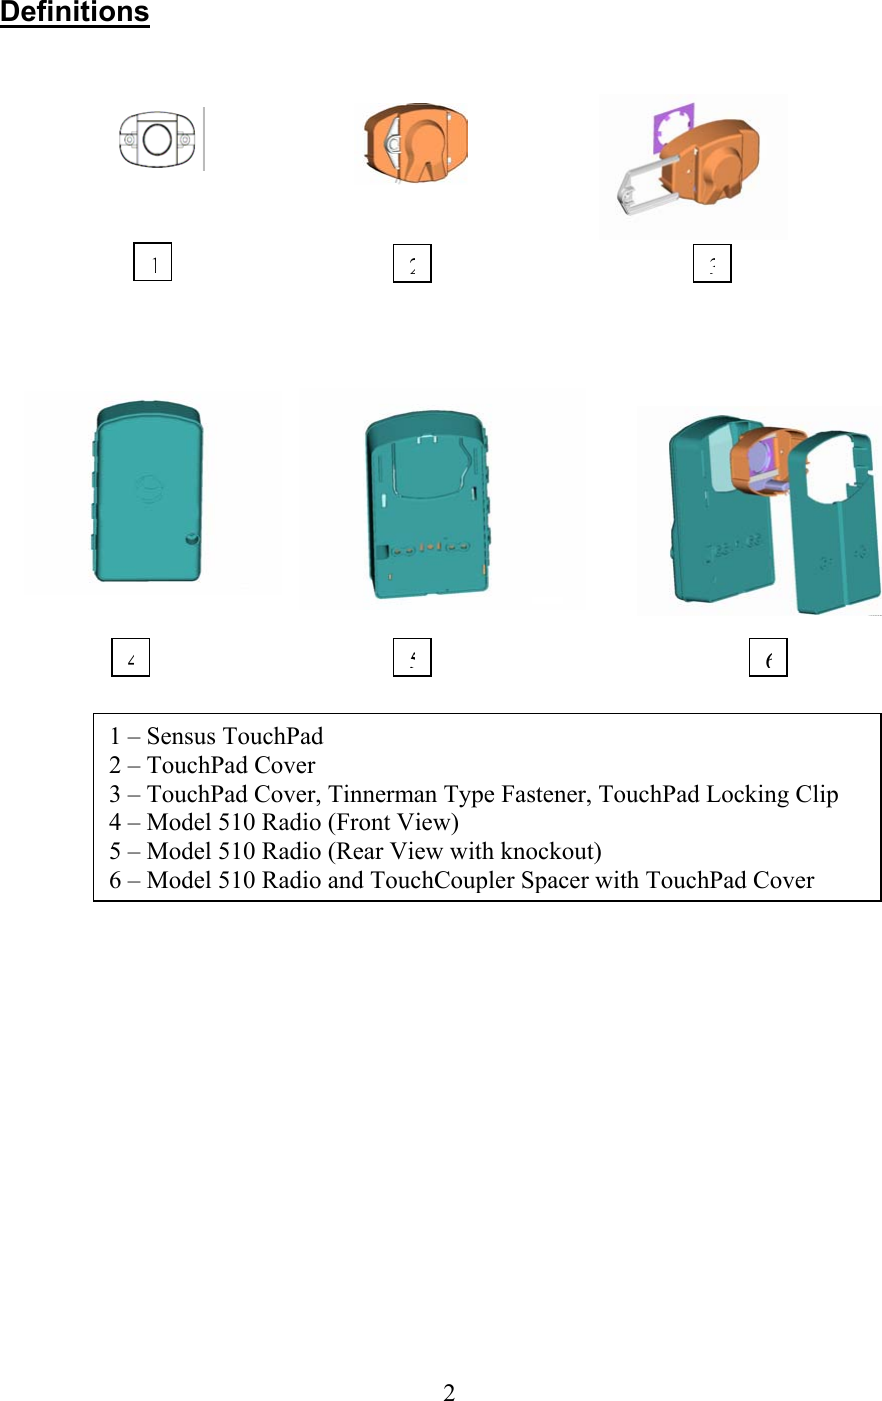  2Definitions         1 – Sensus TouchPad 2 – TouchPad Cover 3 – TouchPad Cover, Tinnerman Type Fastener, TouchPad Locking Clip 4 – Model 510 Radio (Front View) 5 – Model 510 Radio (Rear View with knockout) 6 – Model 510 Radio and TouchCoupler Spacer with TouchPad Cover 123456